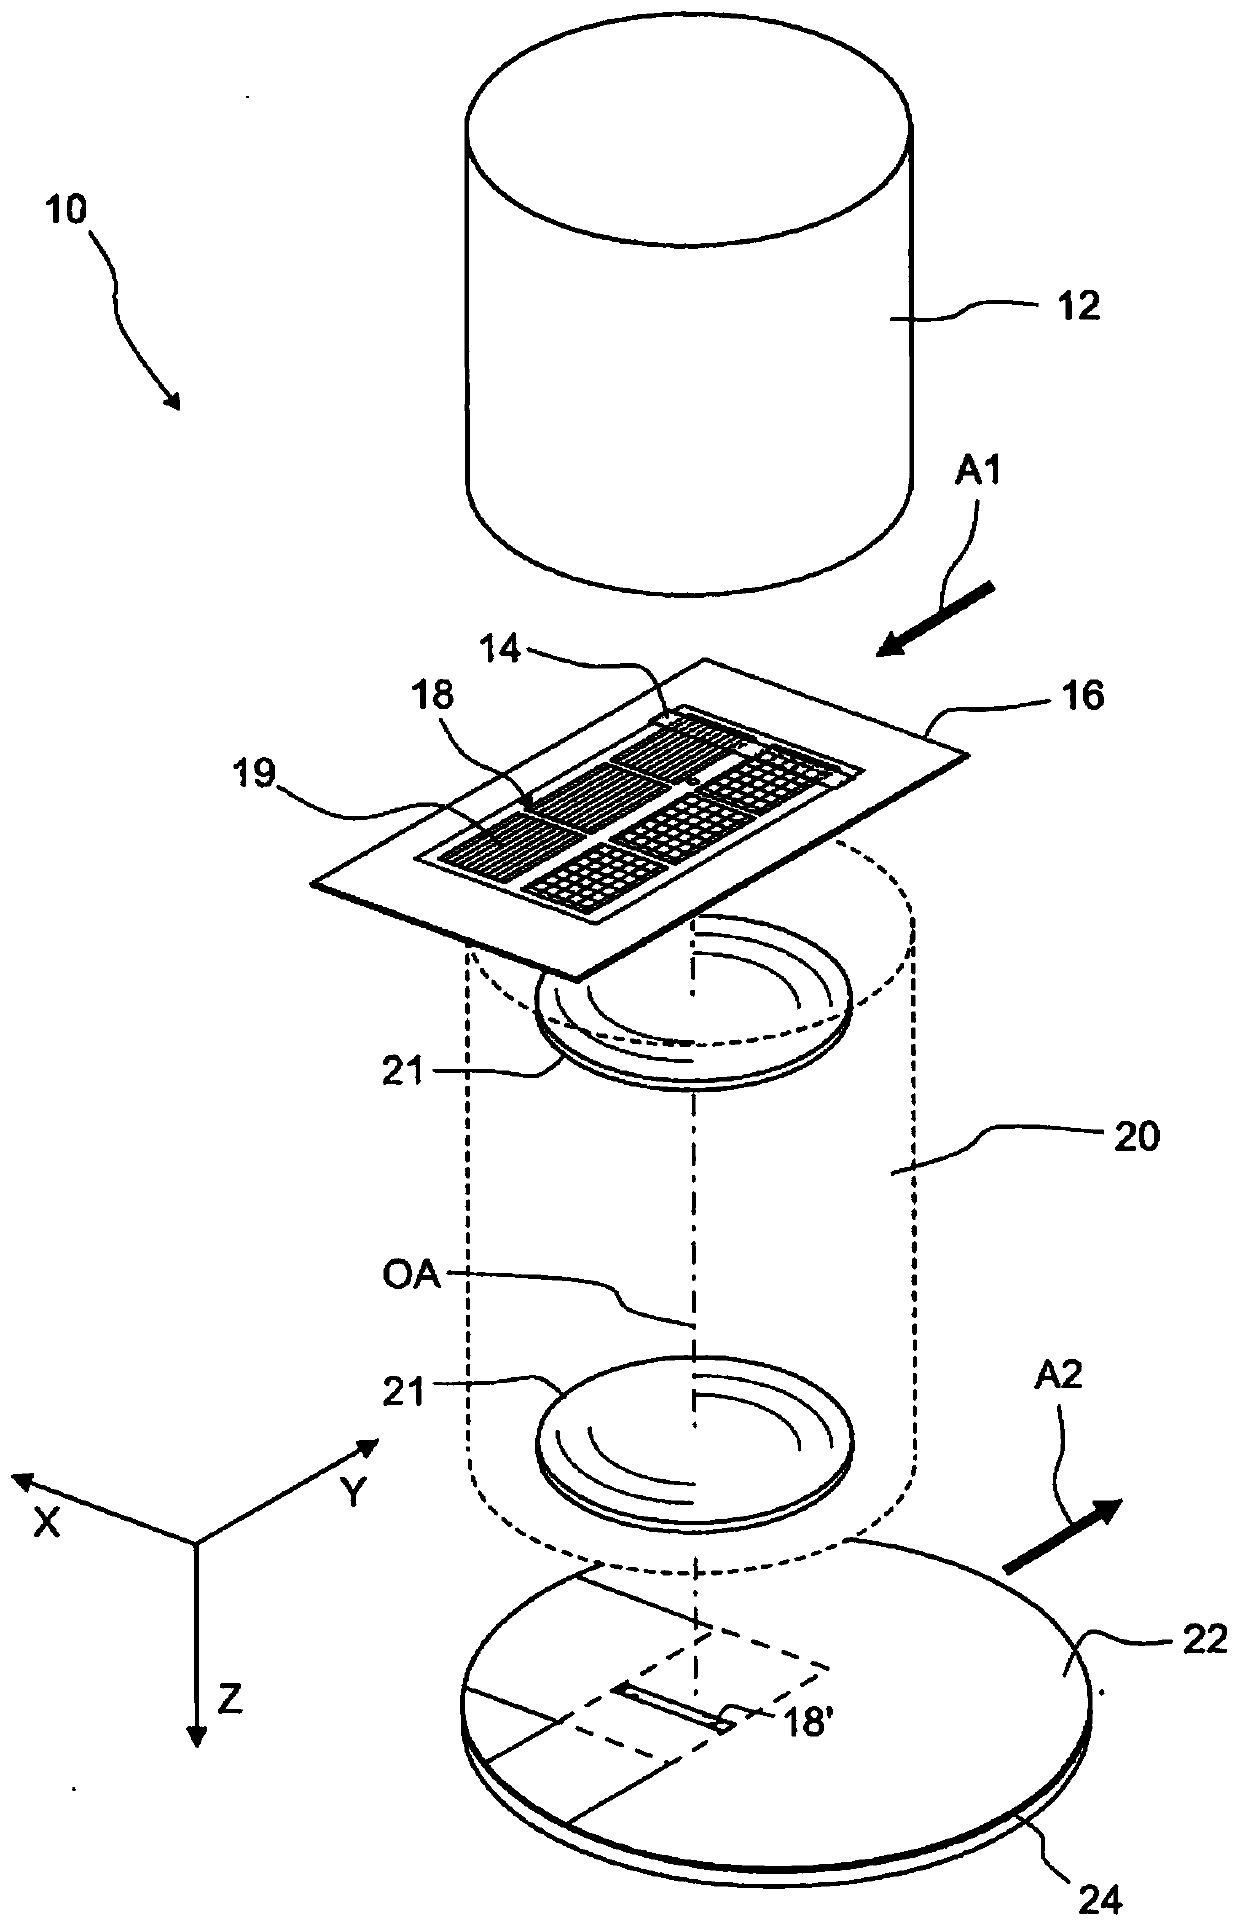 Illumination system of projection exposure equipment for microlithography